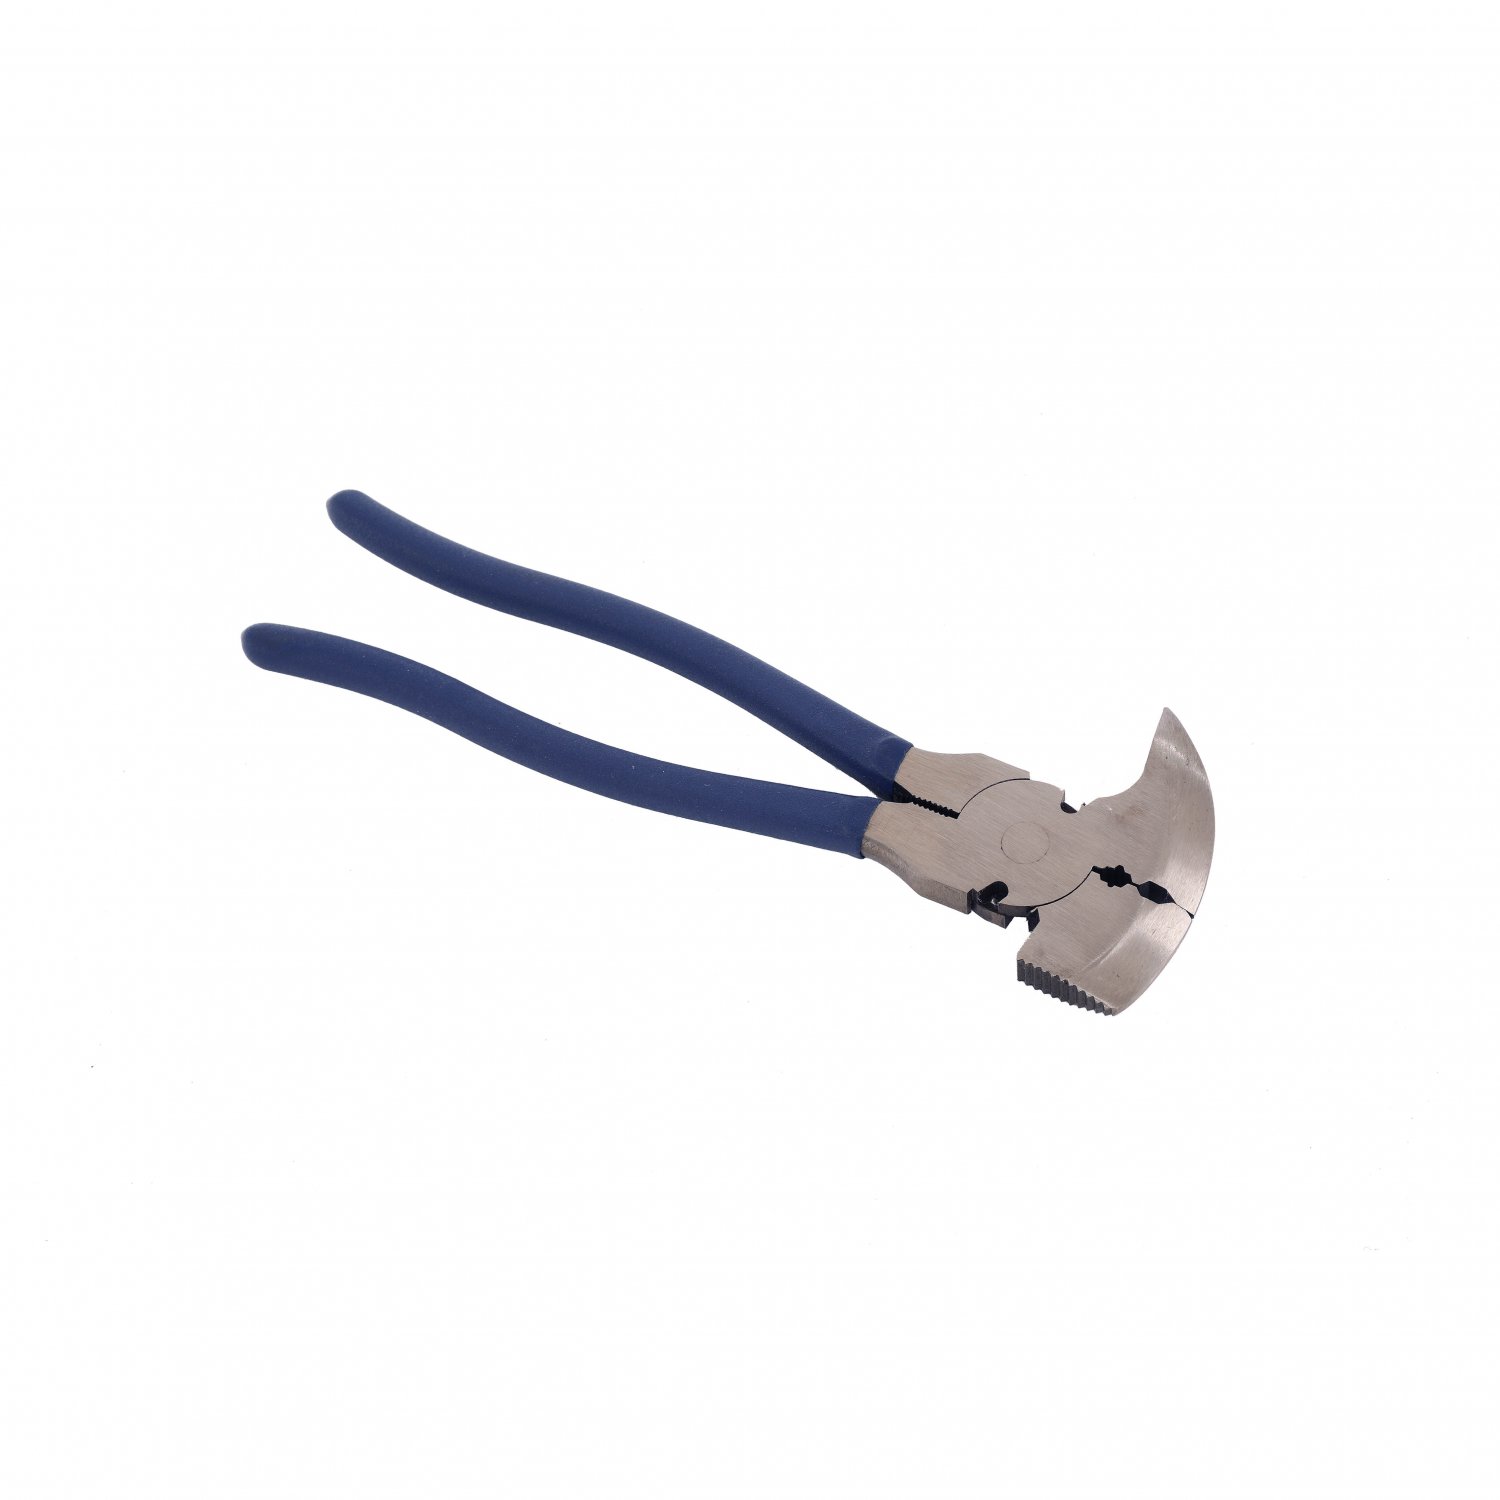 270mm Heavy Duty Cushion Grip Mult-Function Fencing Pliers Wire Cutters